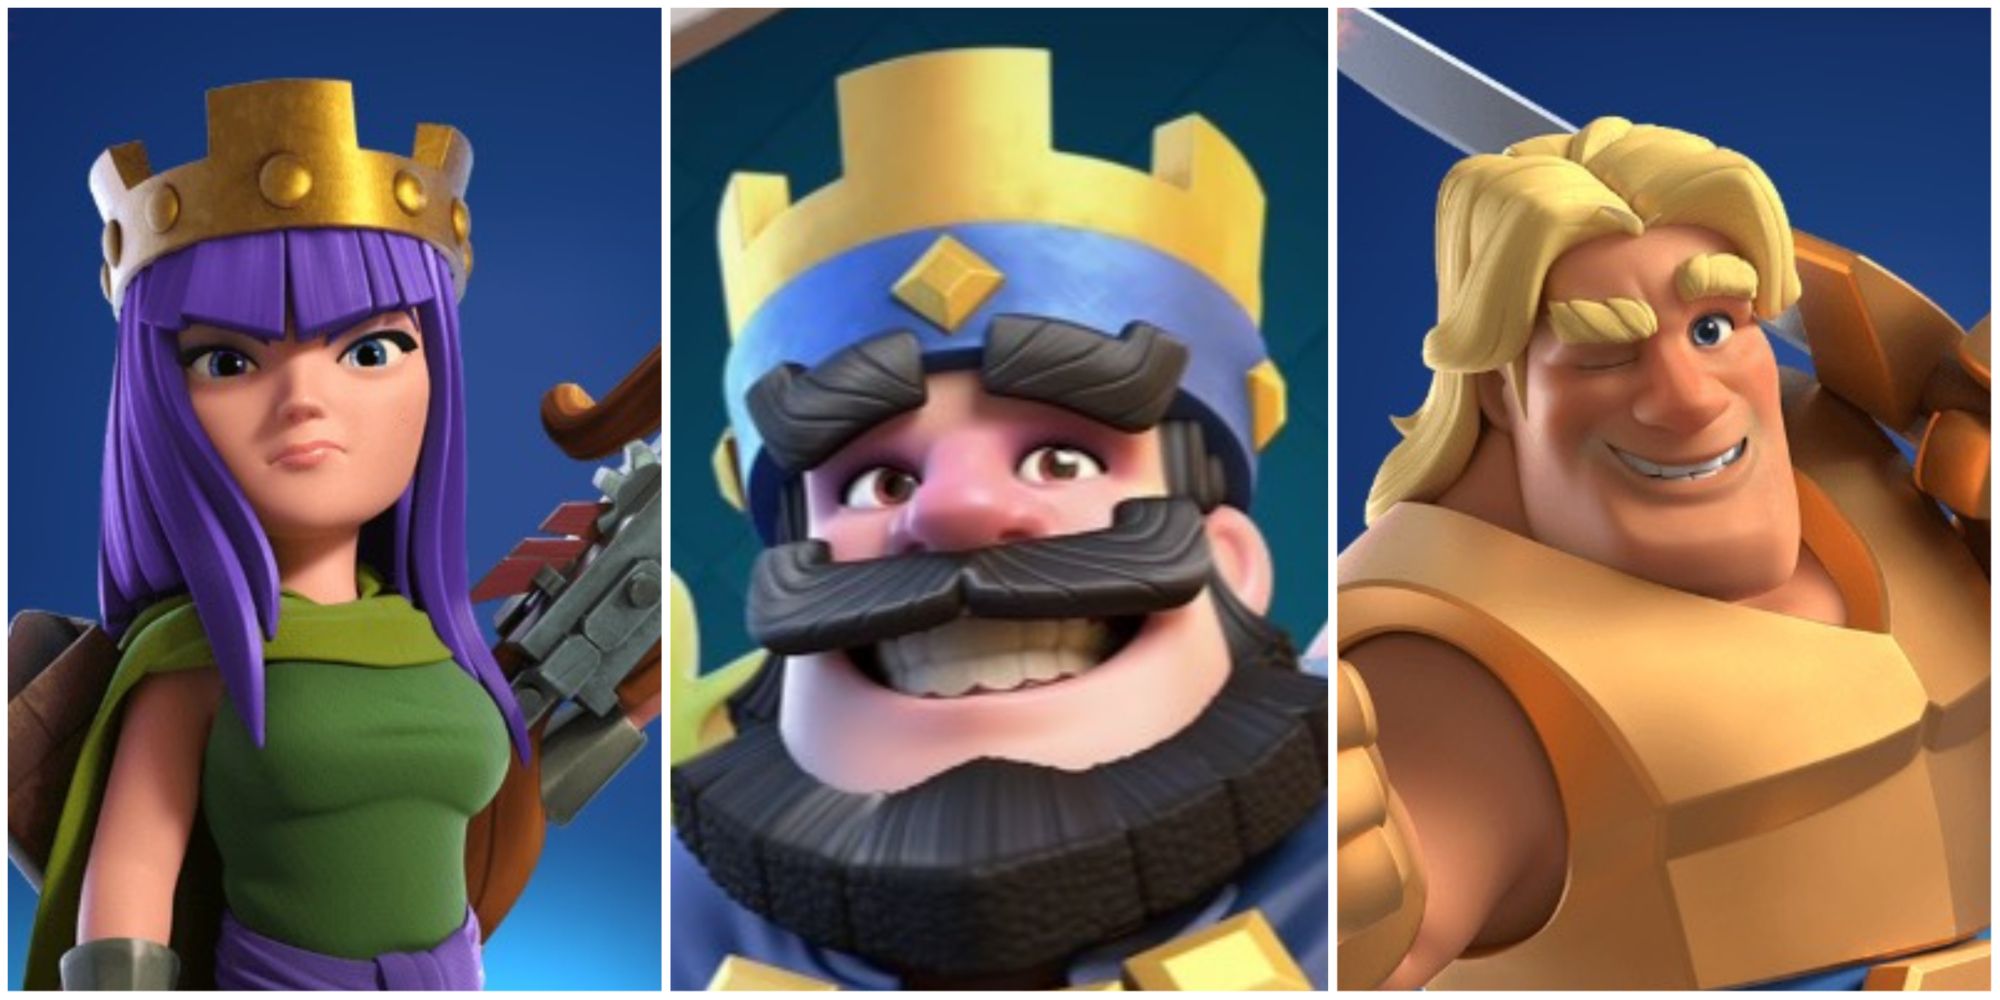 Clash Royale Man With Archer Queen and Golden Knight